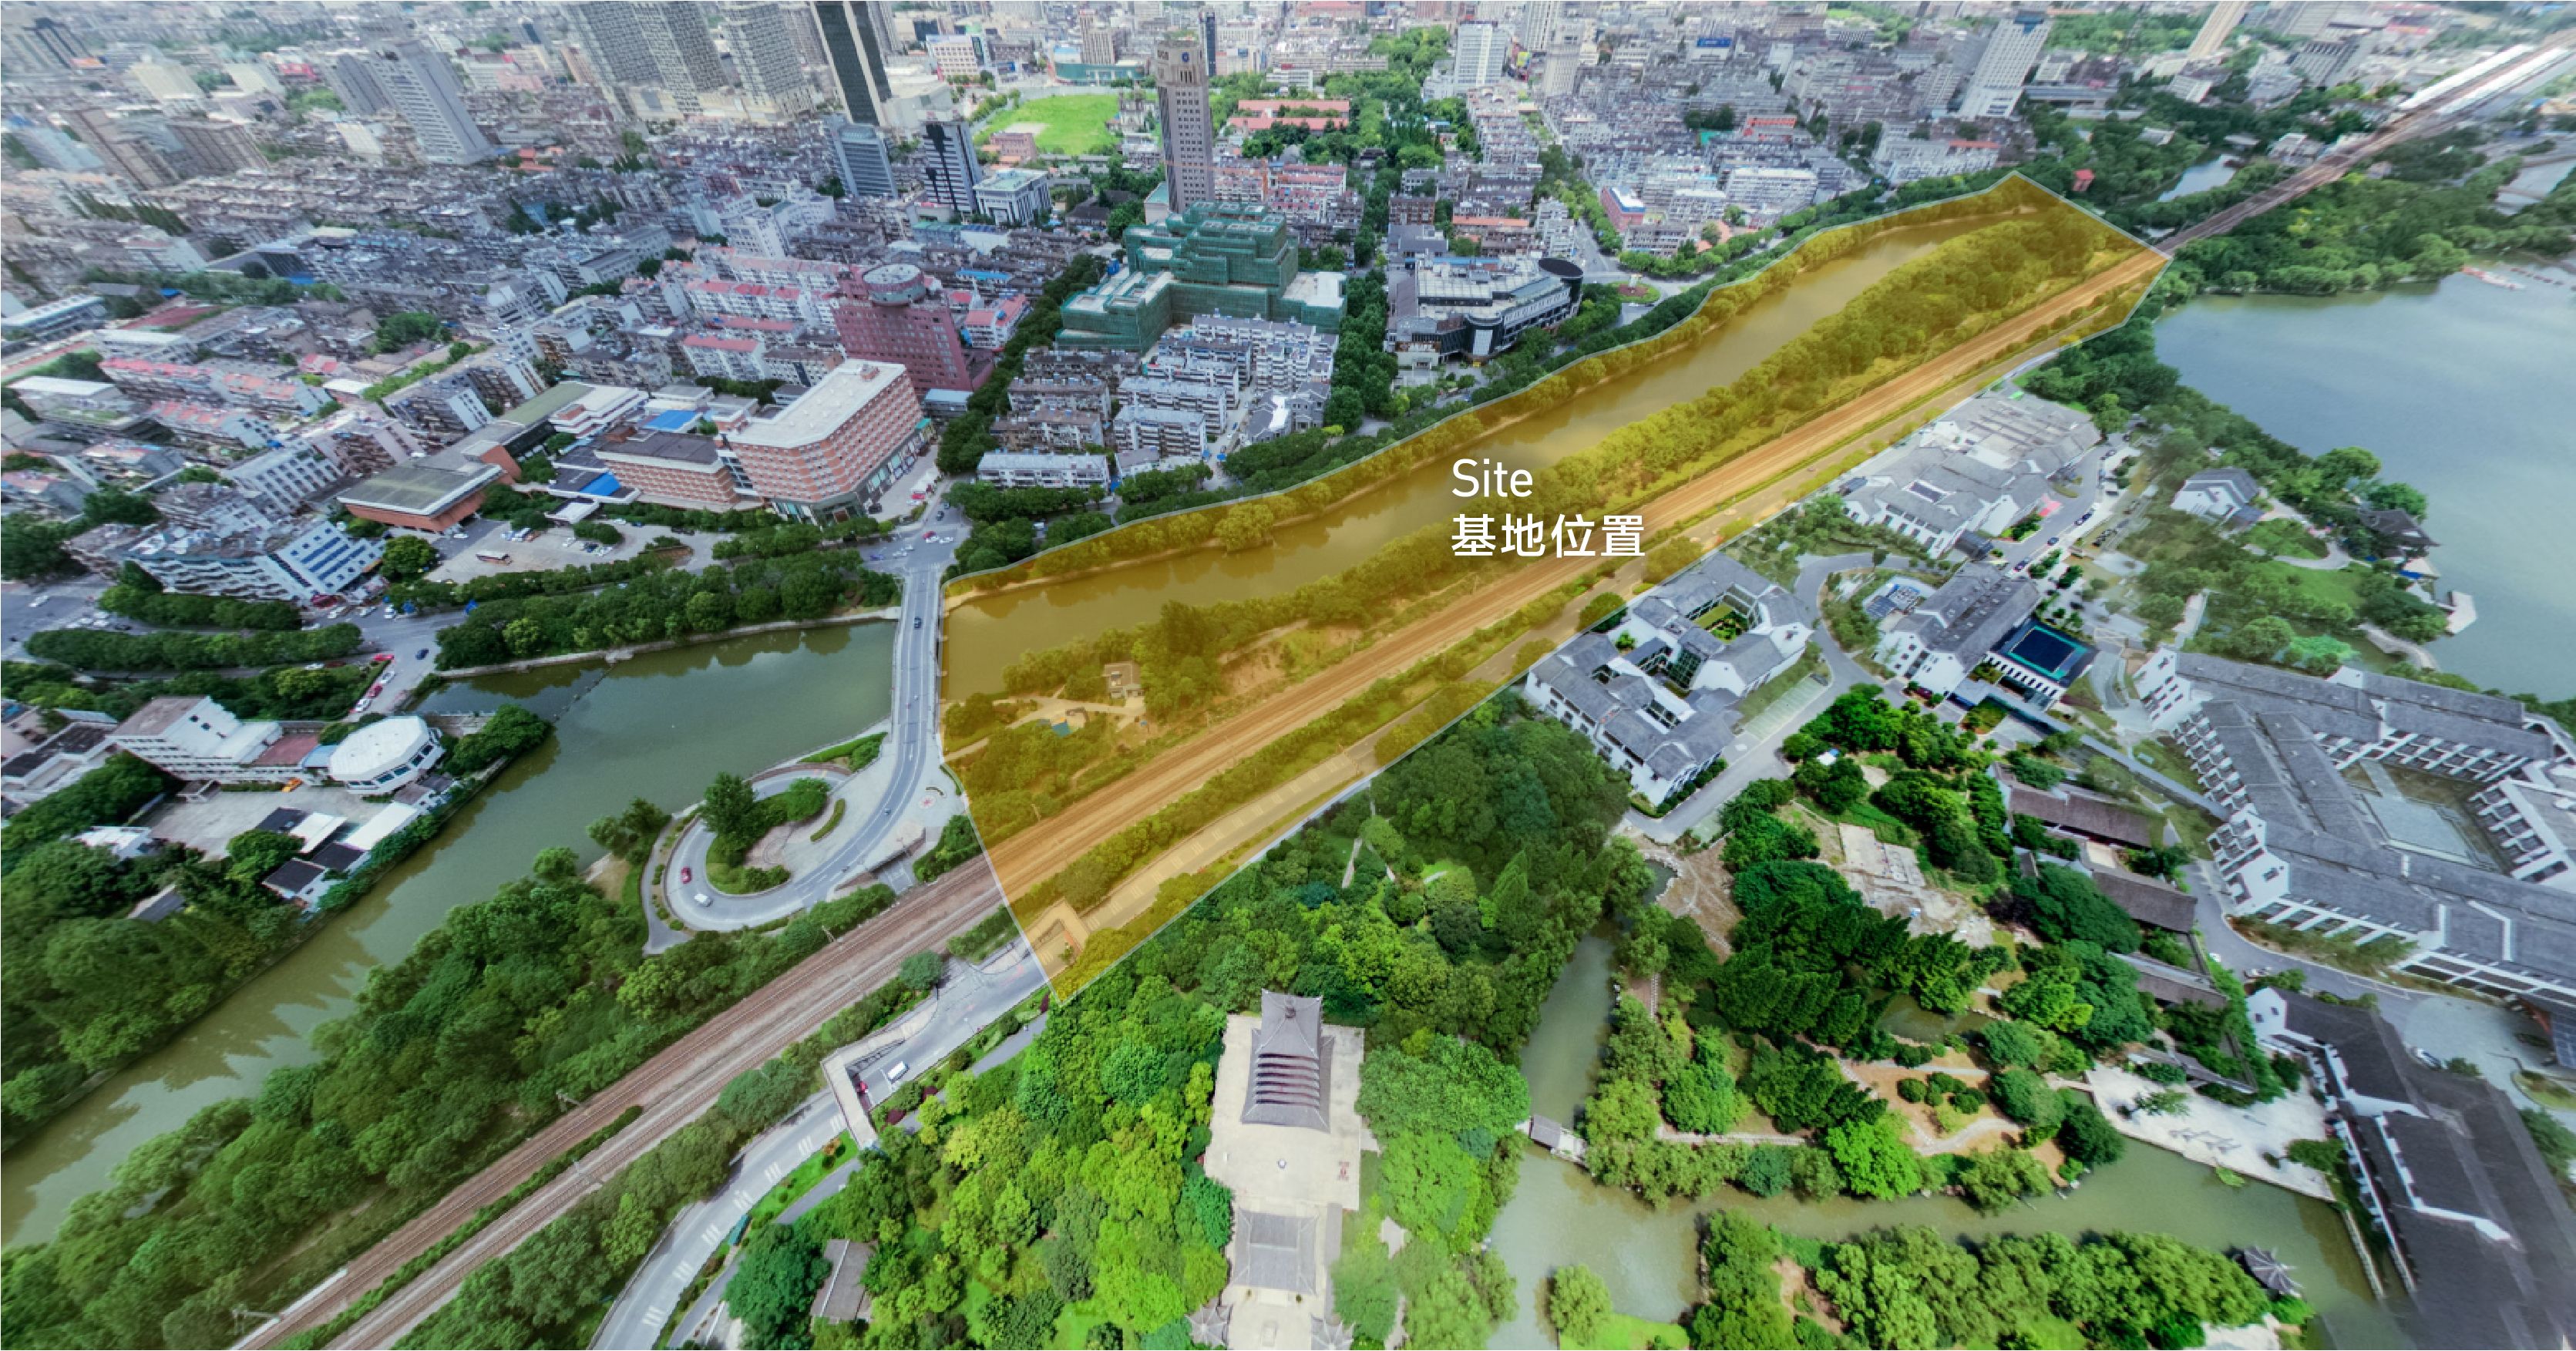 Jiaxing Ancient City Connecting South Lake International Concept Design Competition on Footbridge Crossing Huancheng River and Railway. Site